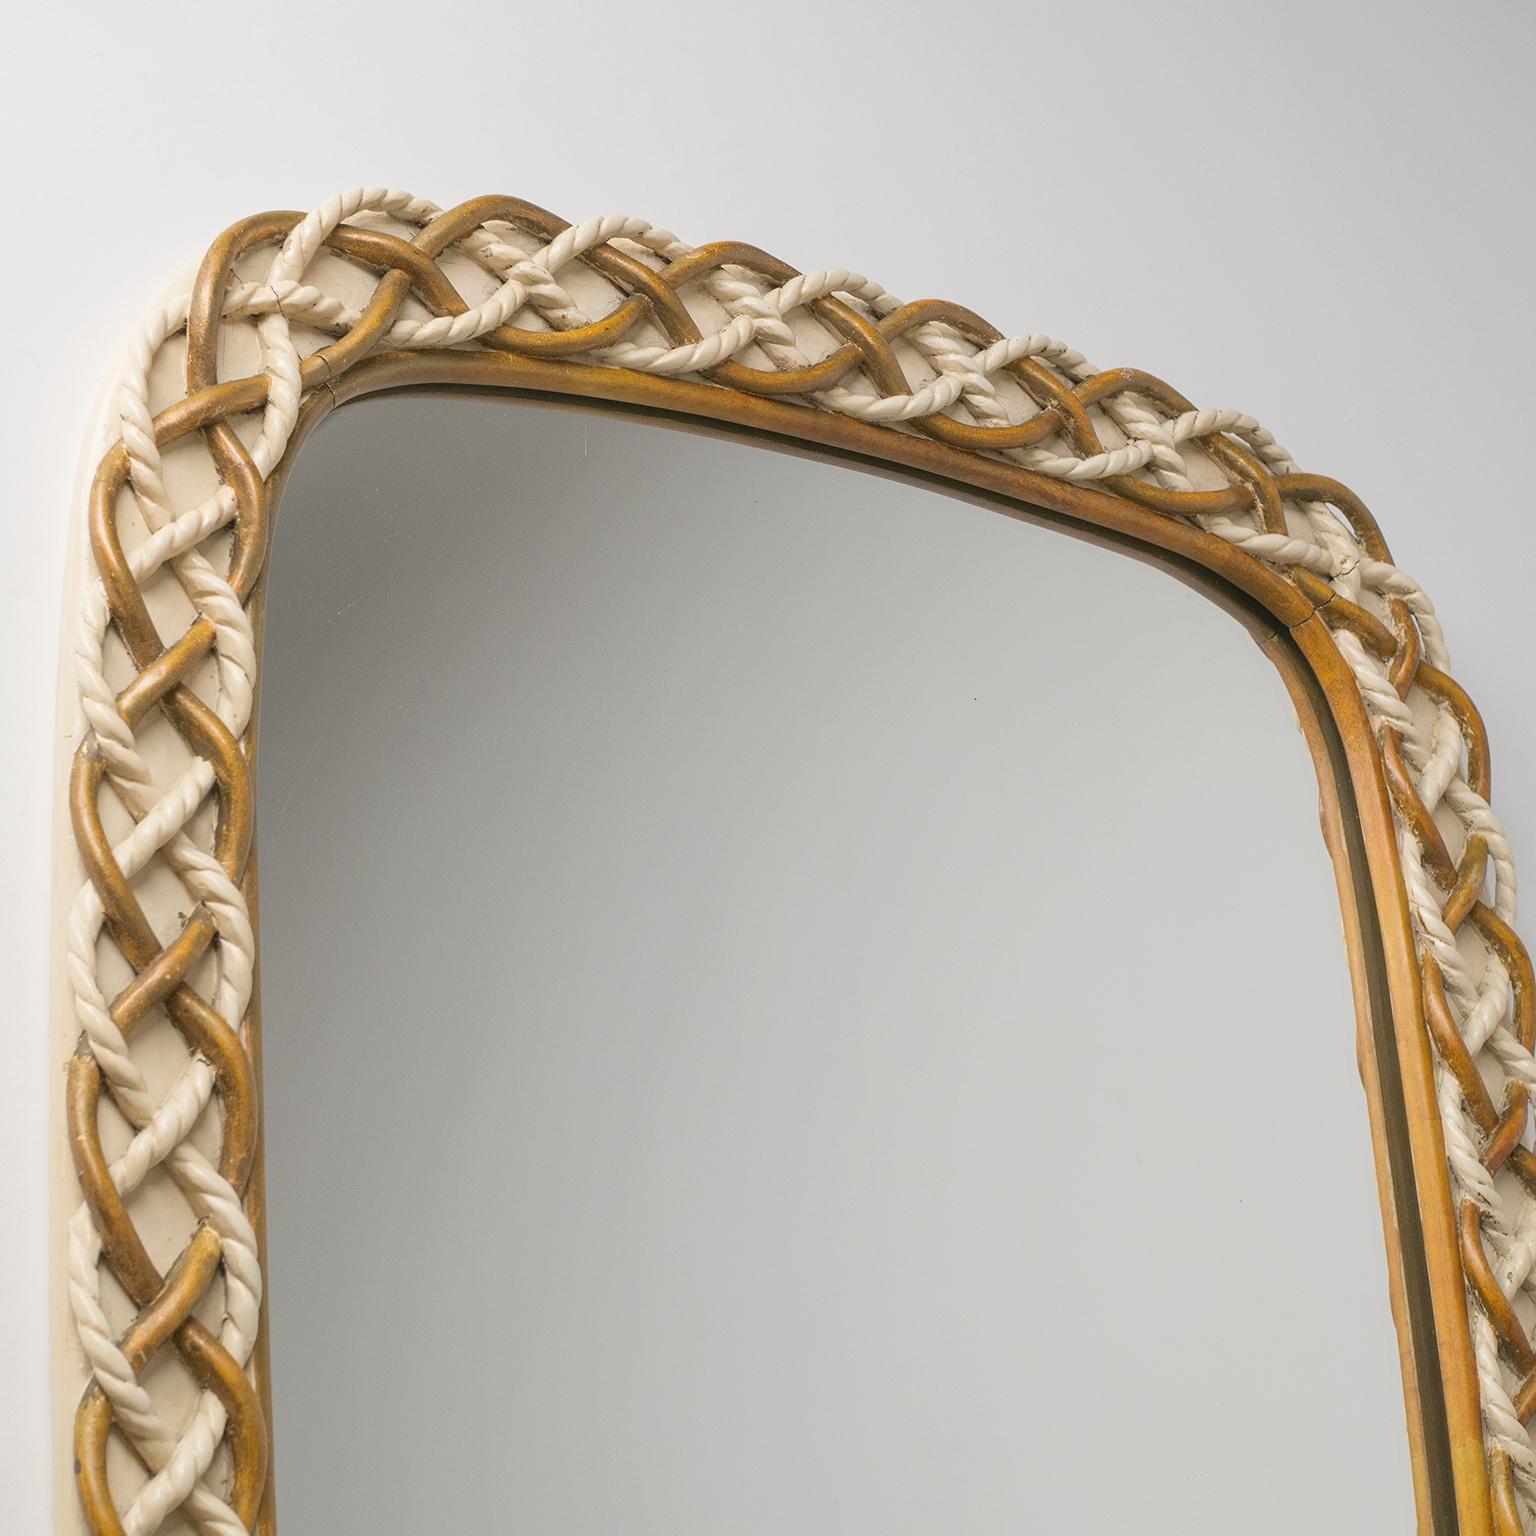 Rare Italian carved wood mirror designed by Osvaldo Borsani in the 1940s. What appears to be intertwined rope is in fact entirely made of hand-carved wood, lacquered in off-white and gold. Comes with a certificate of authenticity by the Archivo